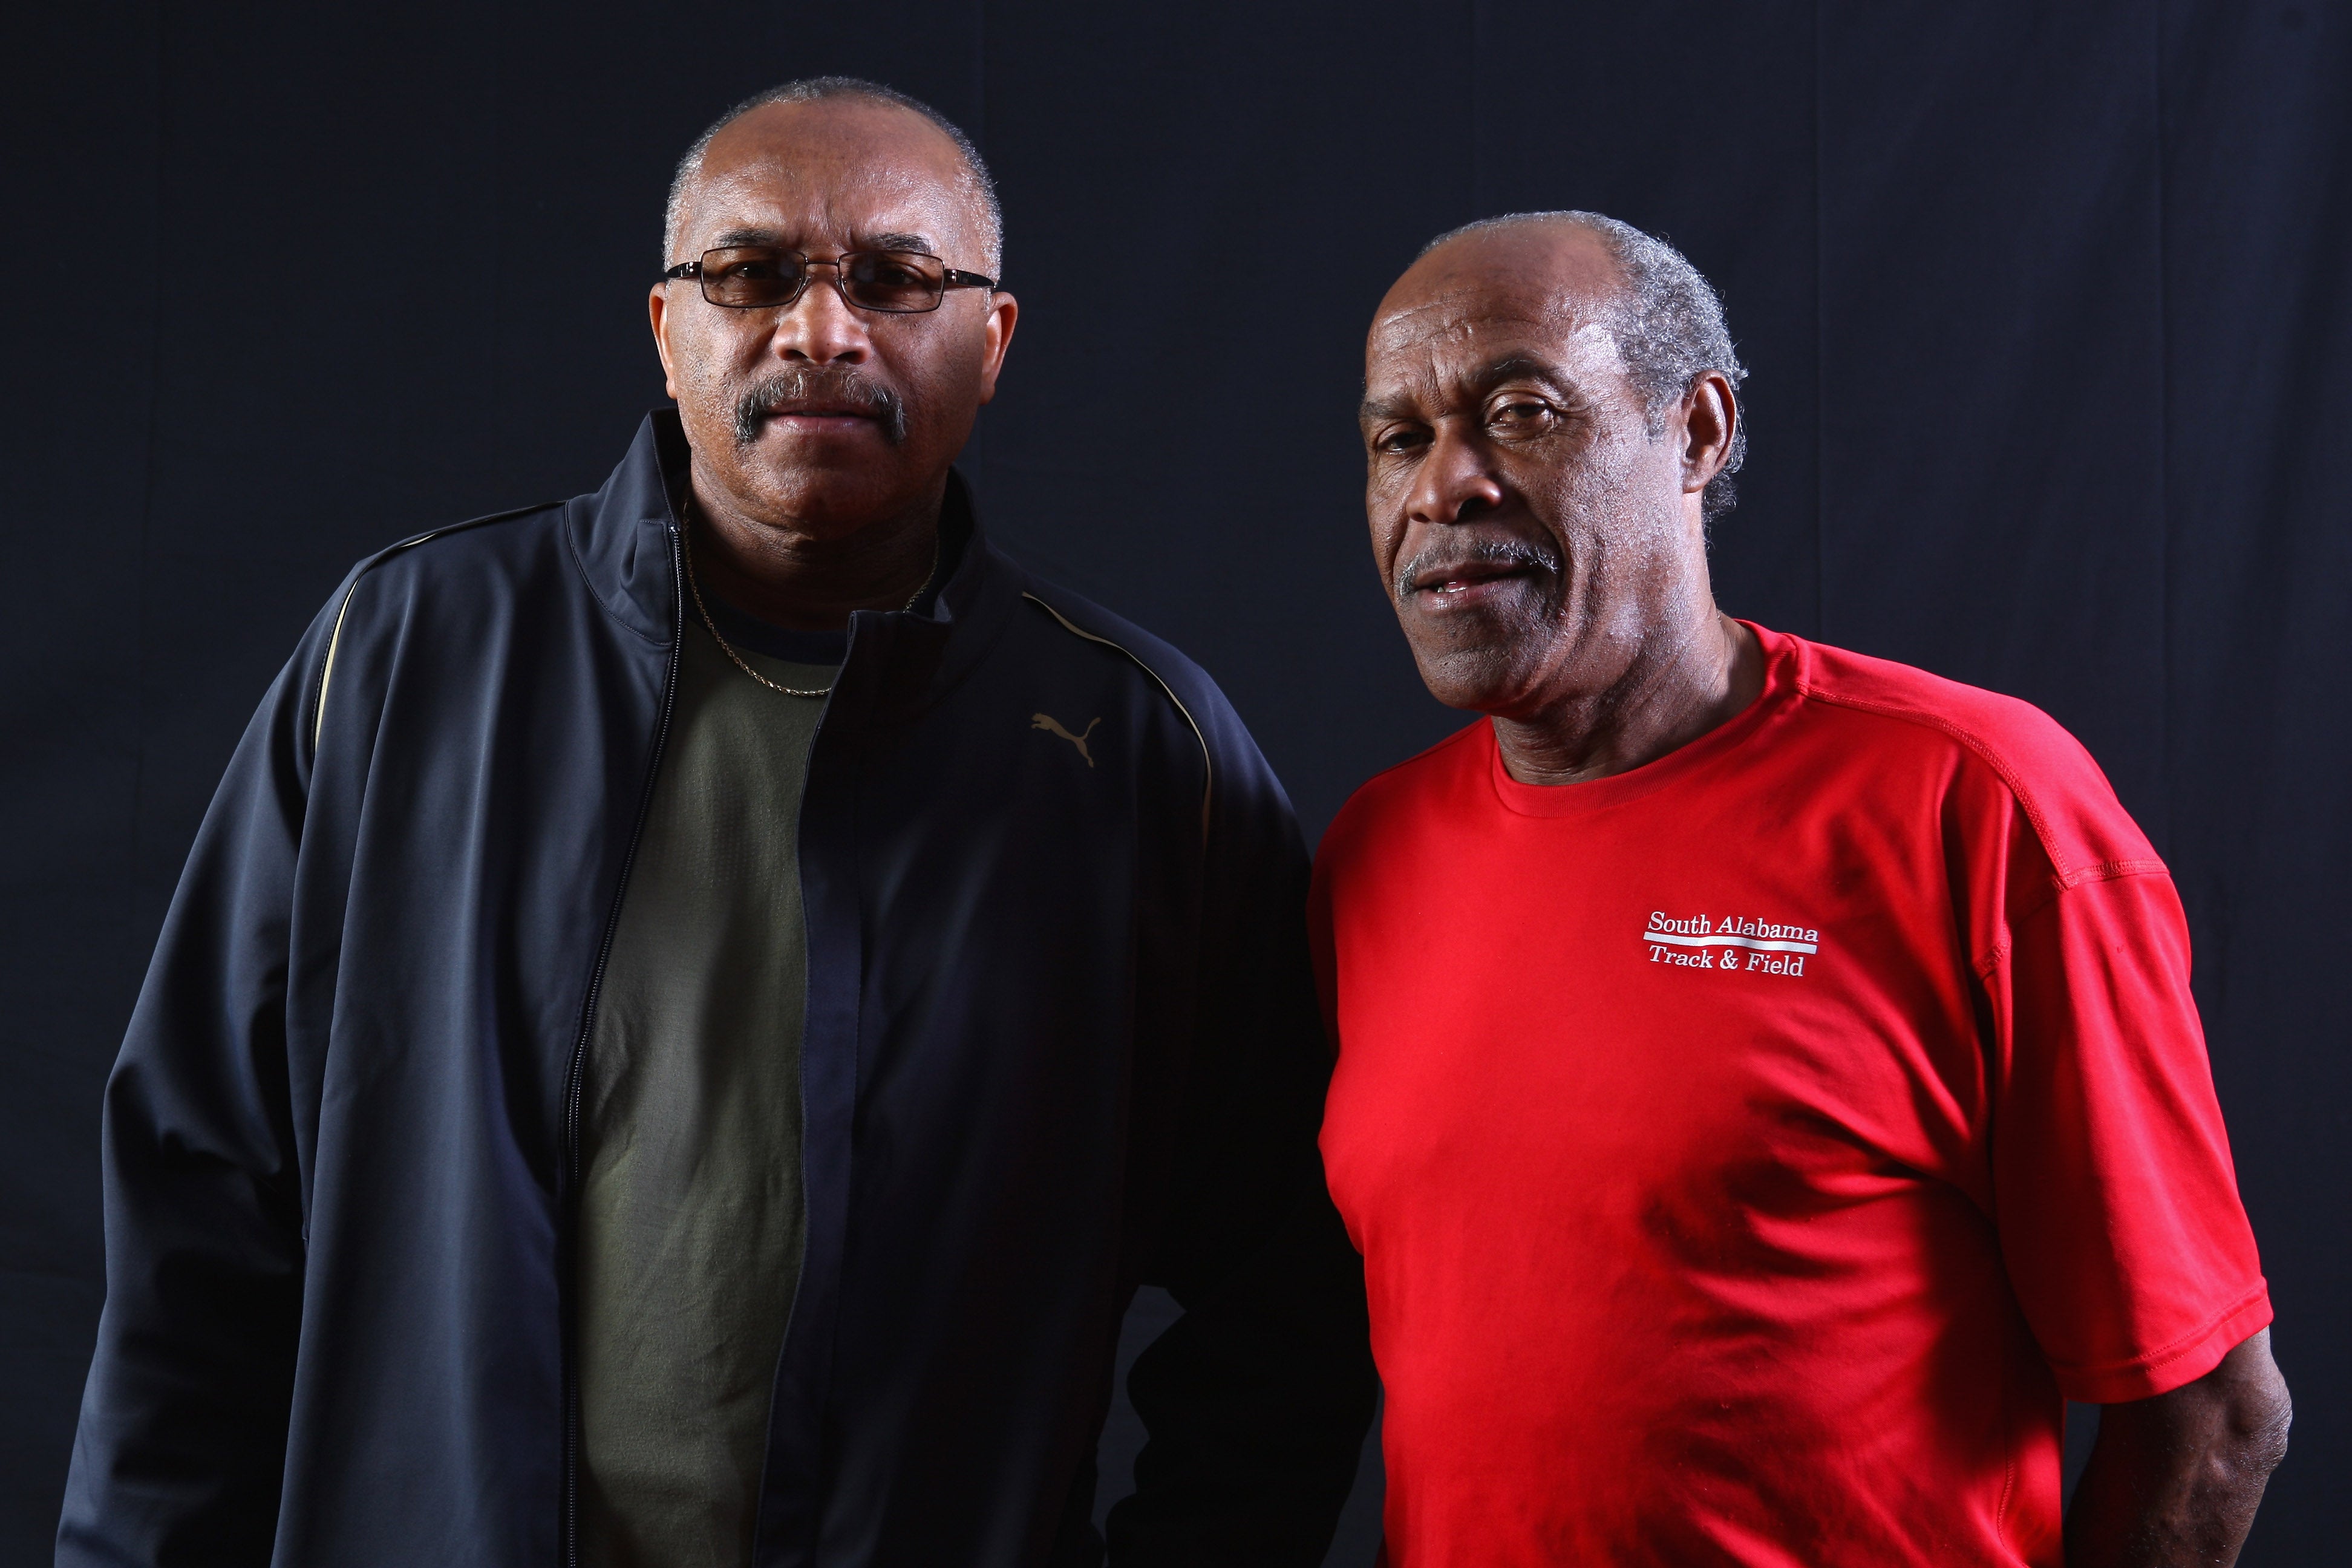 Olympic Sprinters Tommie Smith and John Carlos To Be Inducted Into Hall of Fame